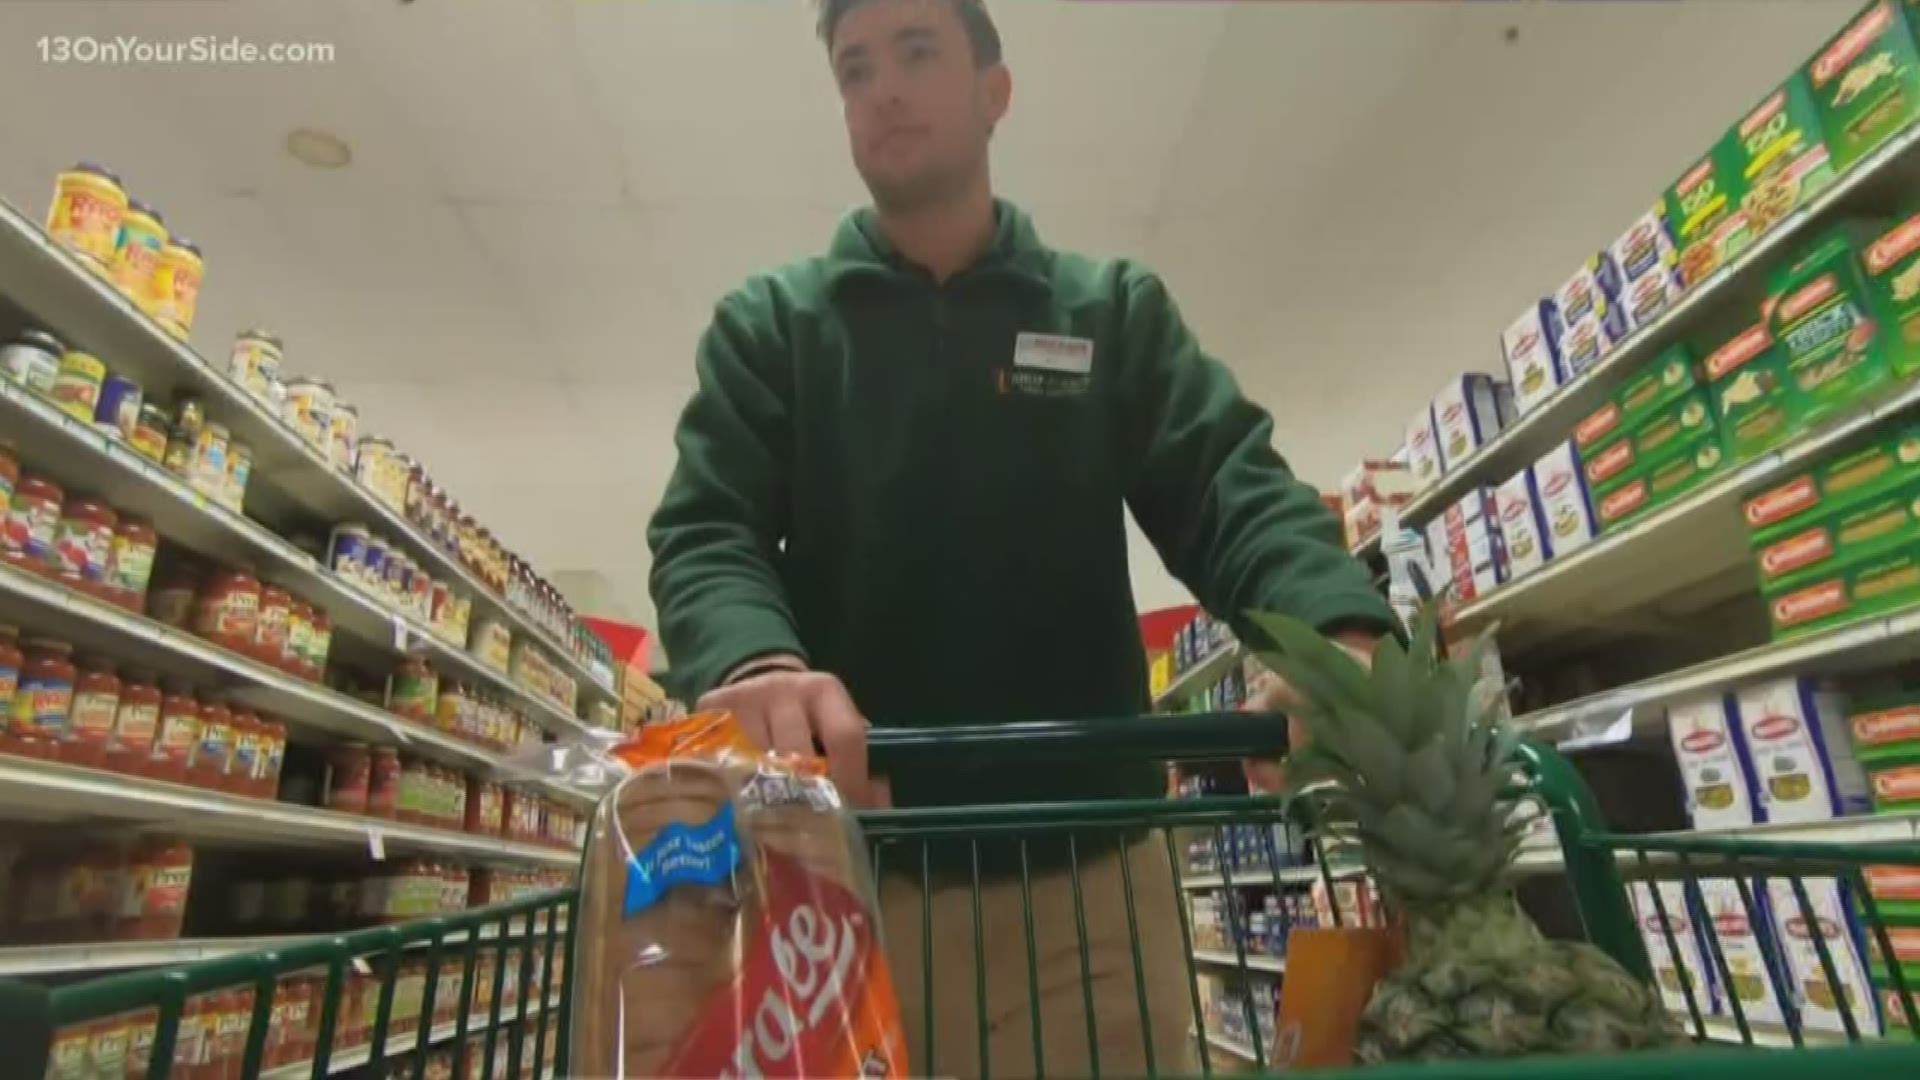 When Fremont High School closed, Jaxon Deur wanted to stay busy. He turned his part-time job as a grocery 'bagger' into full-time help for his community.